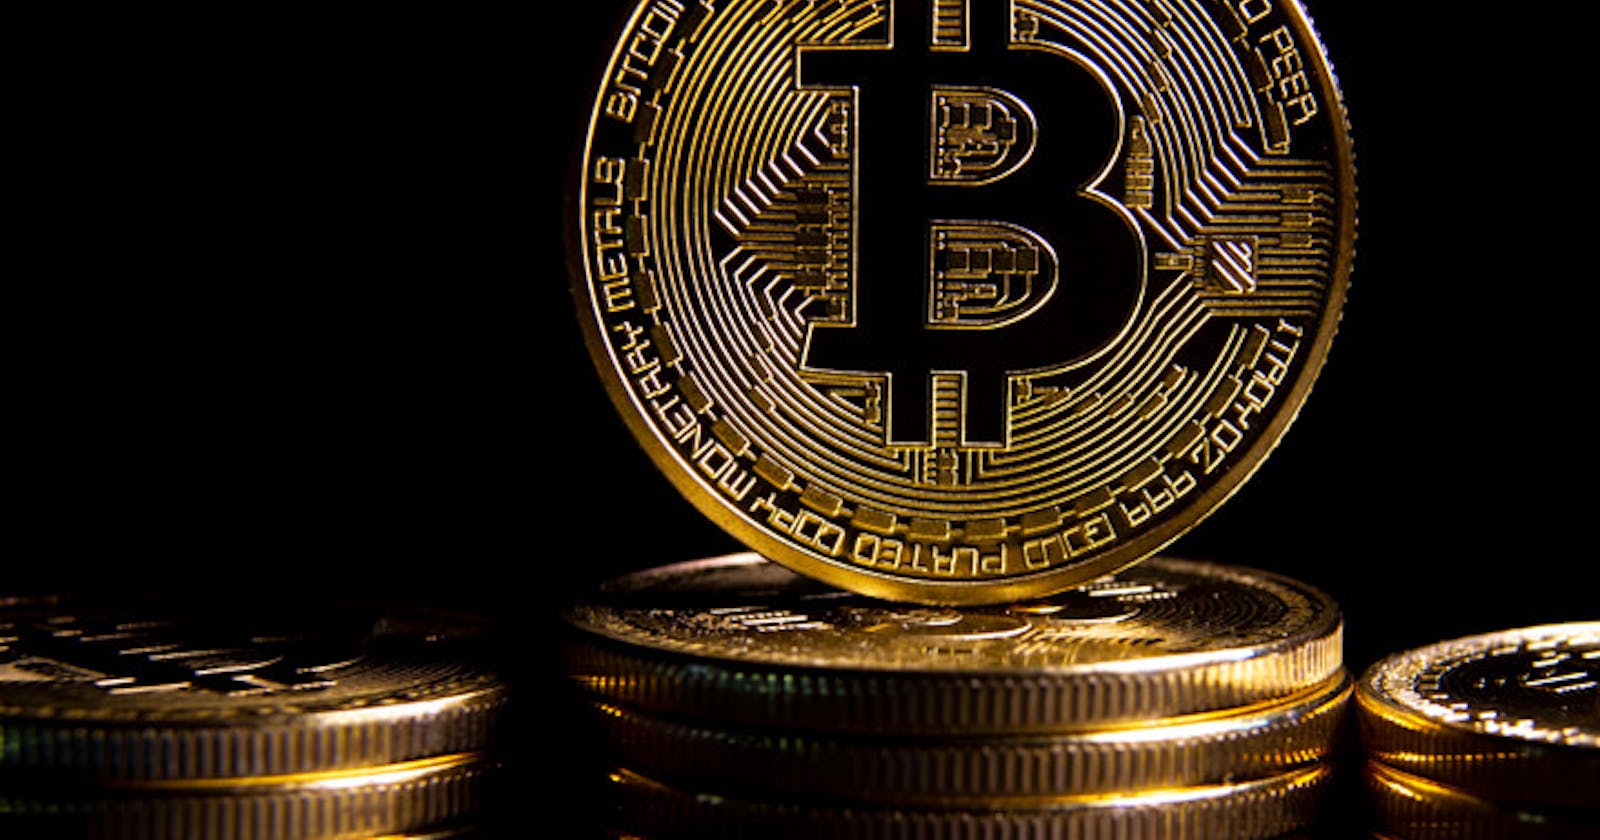 Why is Bitcoin's value rising?